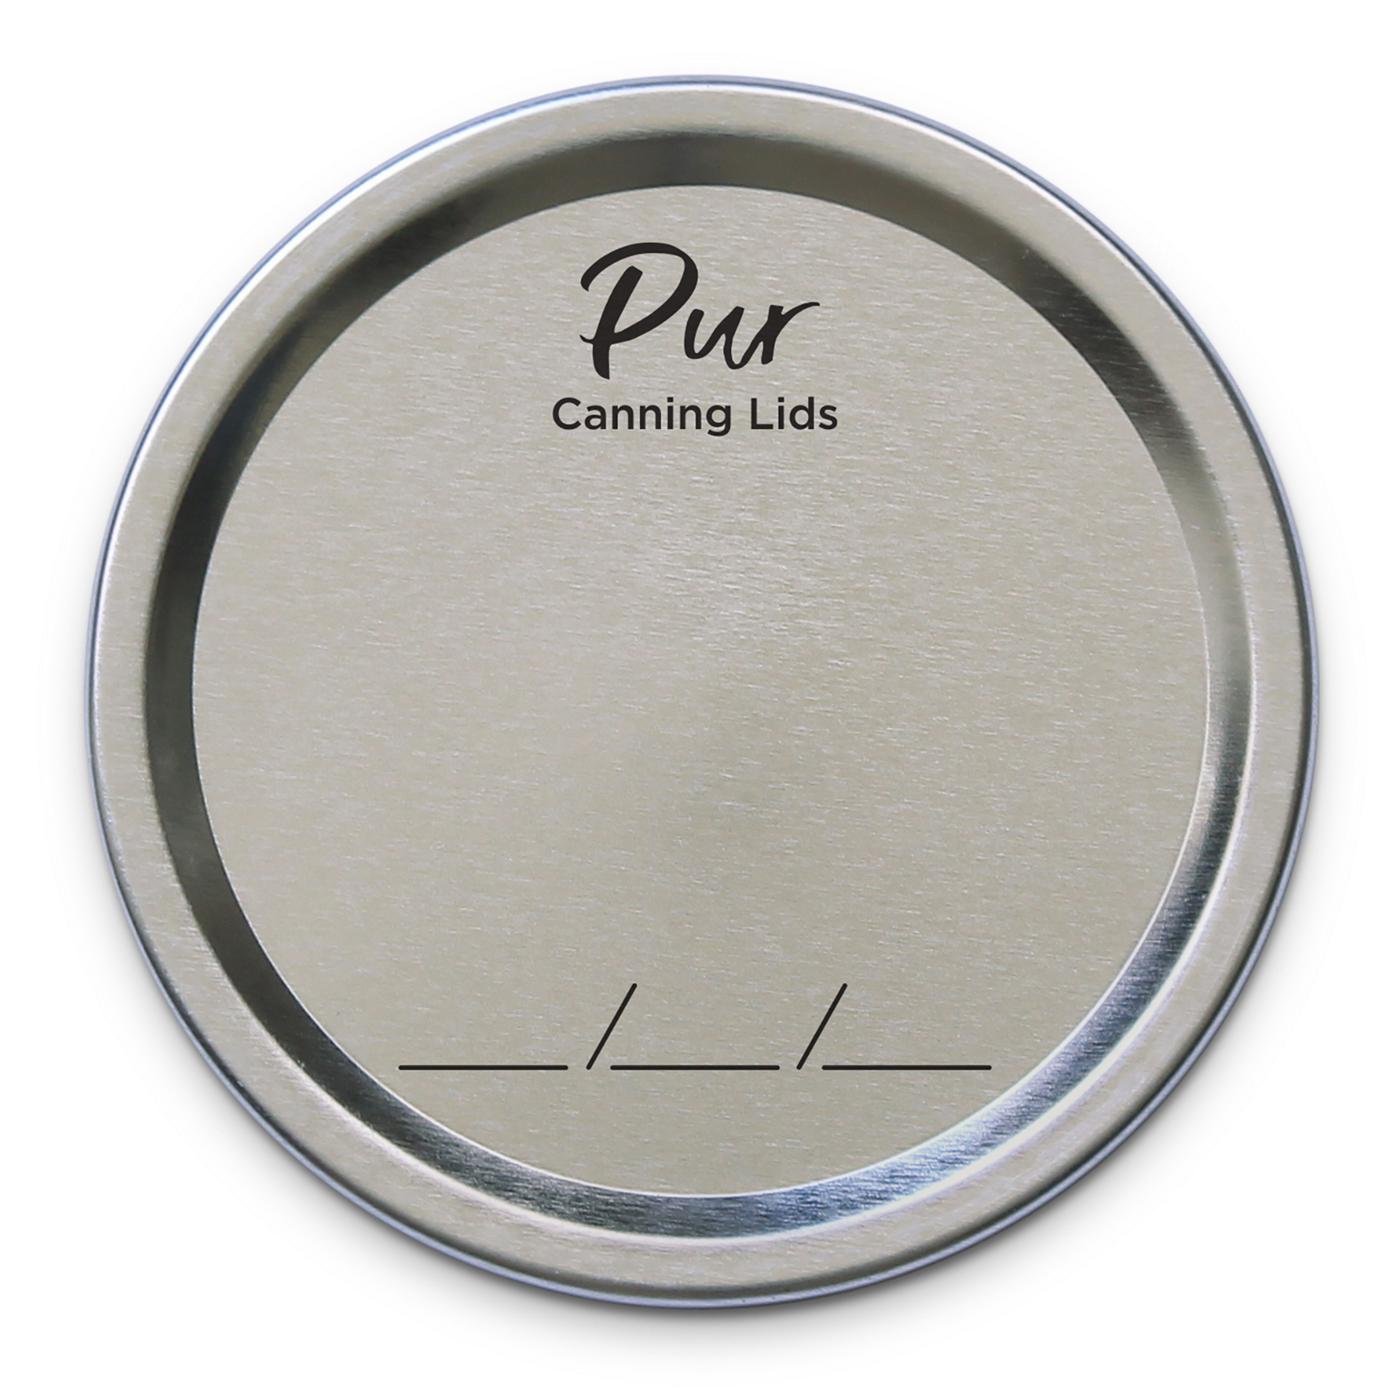 Pur Mason Wide Mouth Canning Lids; image 2 of 3